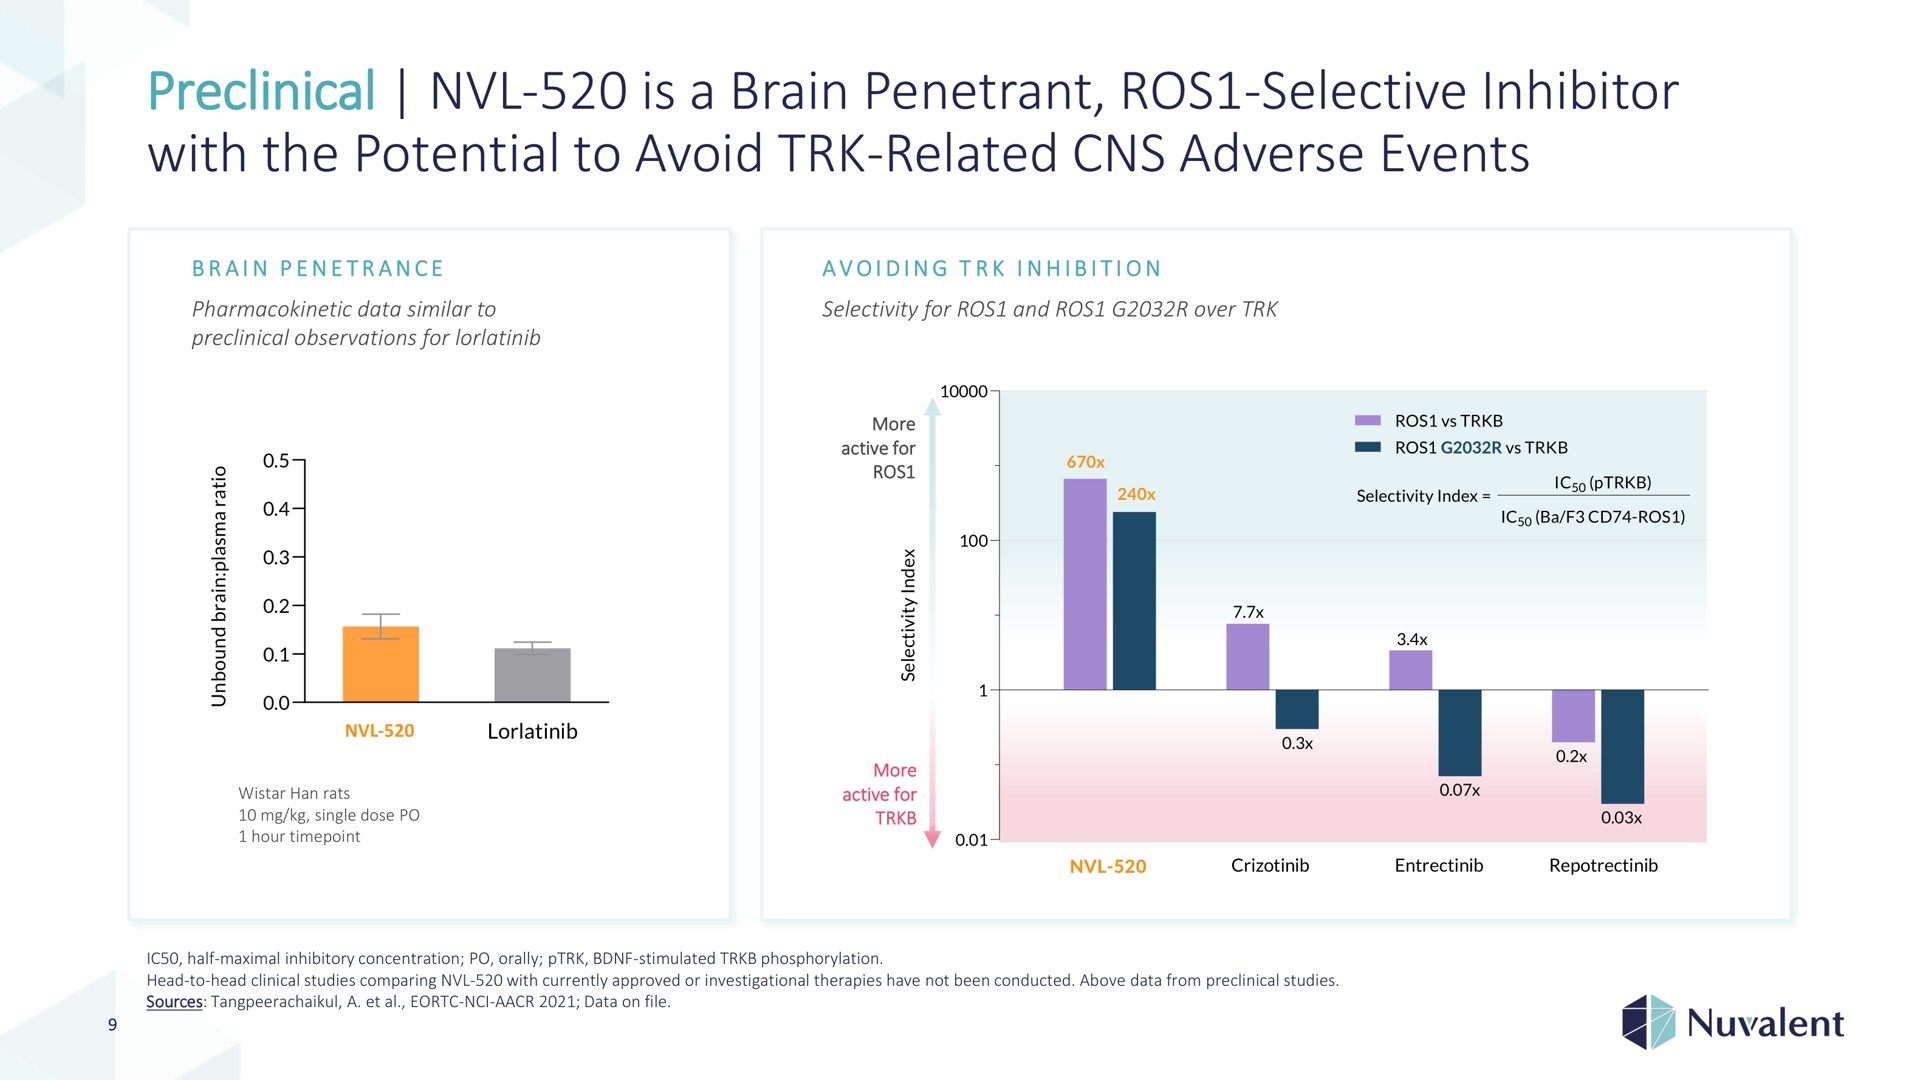 preclinical is a brain penetrant selective inhibitor with the potential to avoid related adverse events | Nuvalent